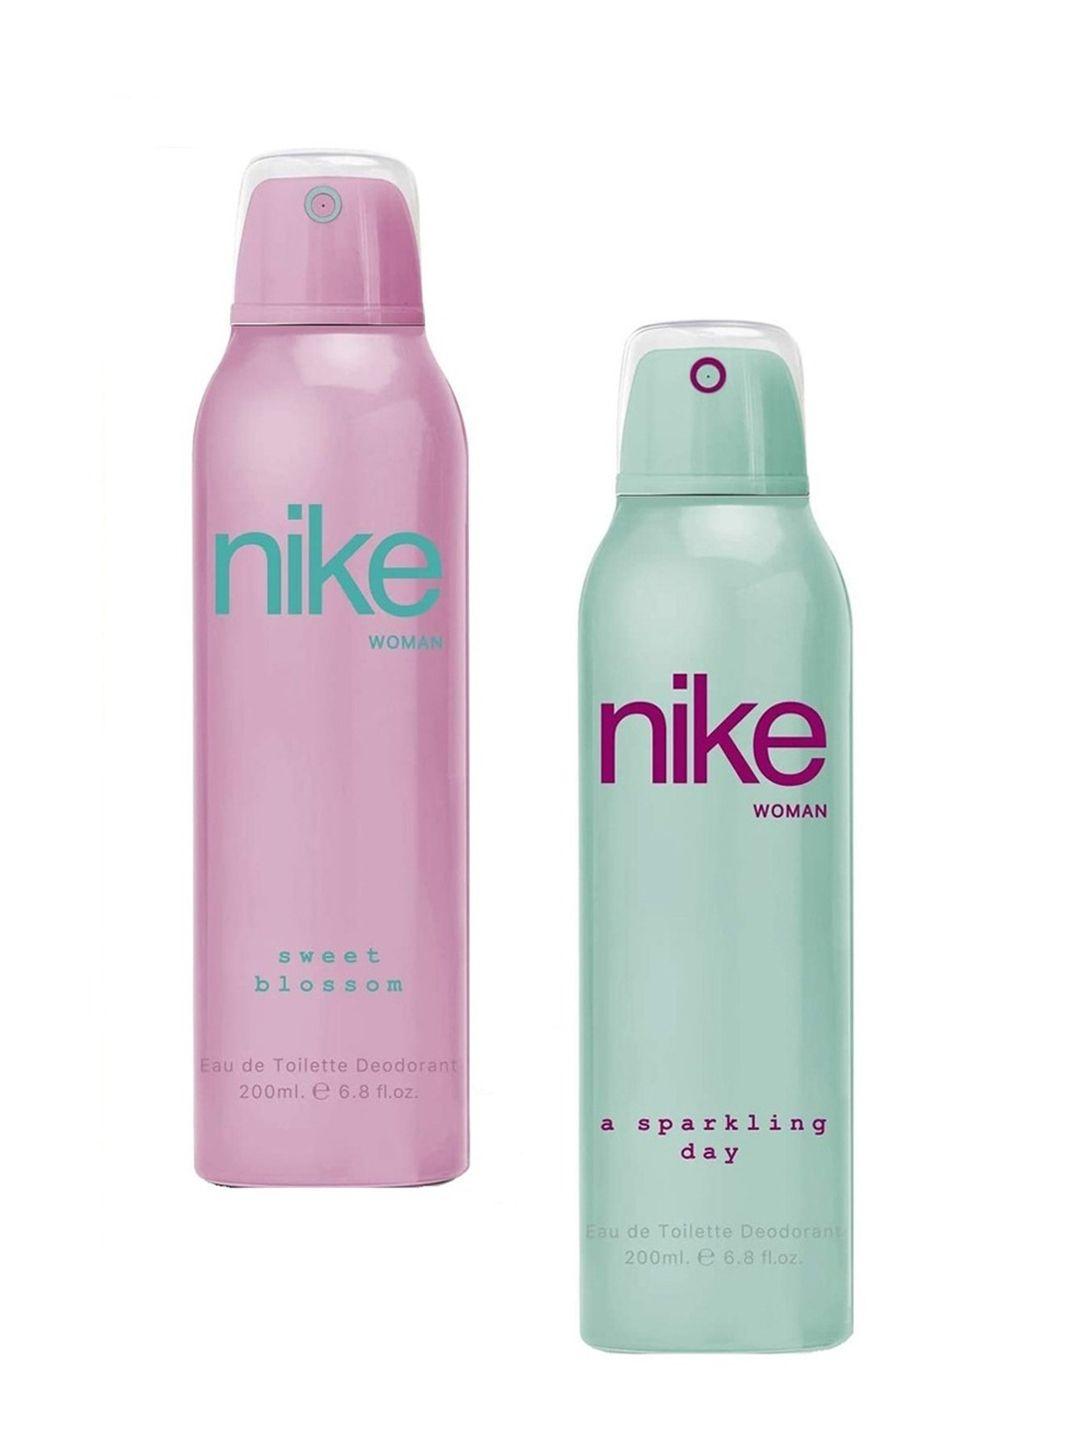 nike-pack-of-2-woman-sweet-blossom-&-a-sparkling-day-deodorant--200ml-each